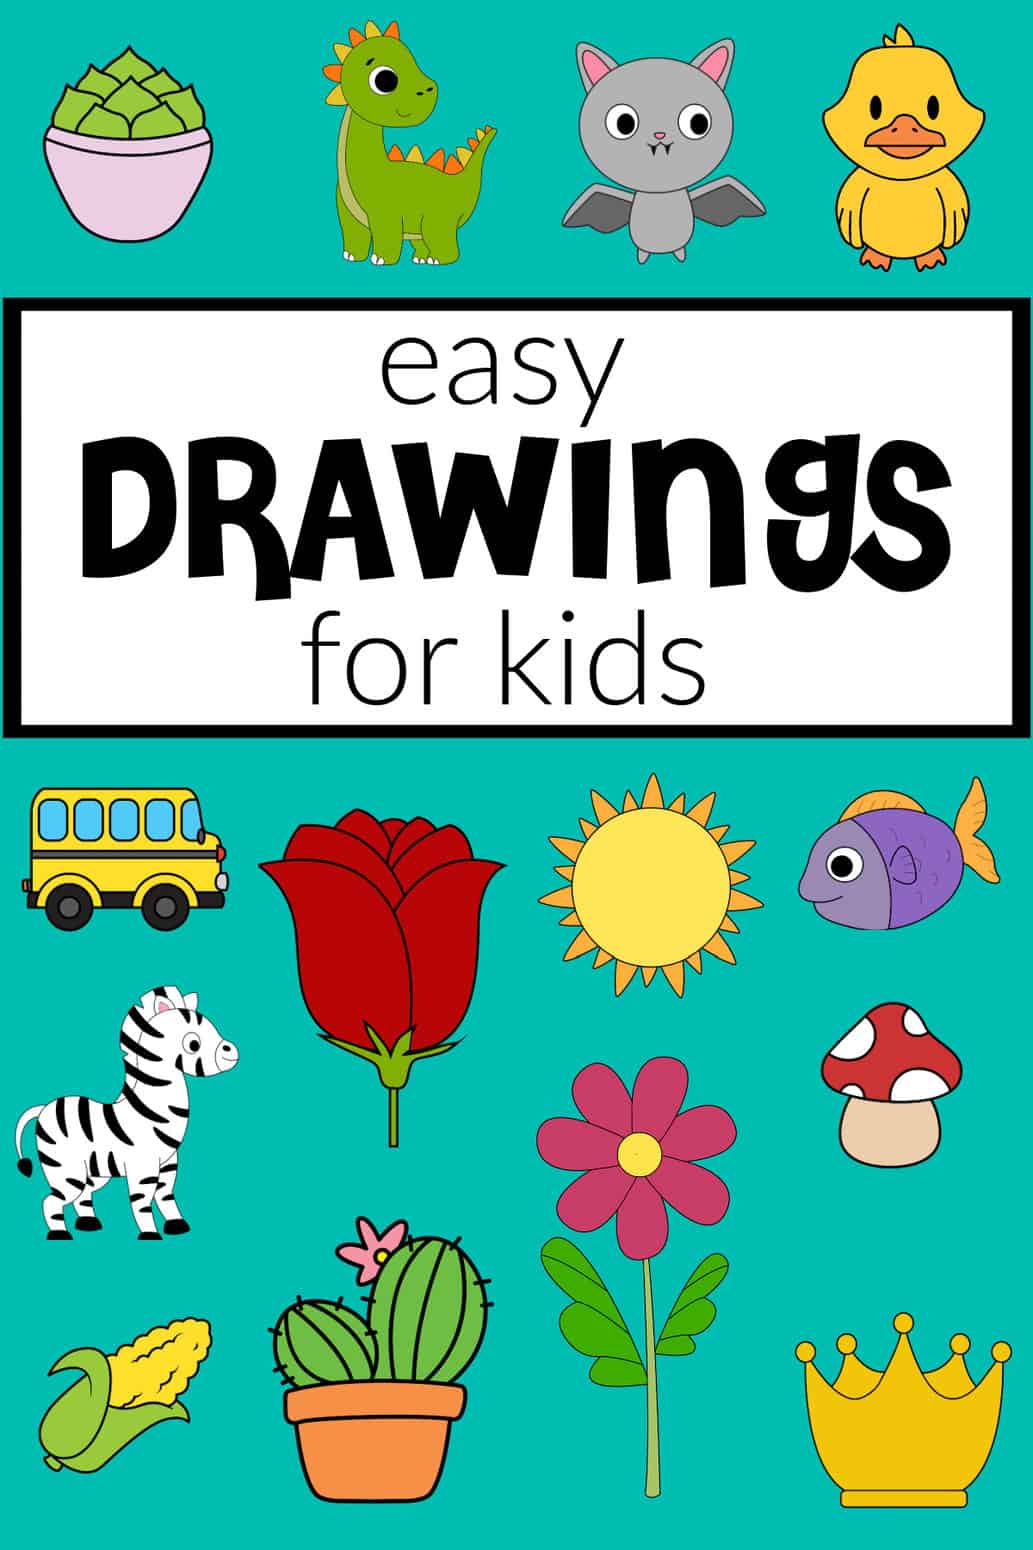 easy sketches to draw for kids